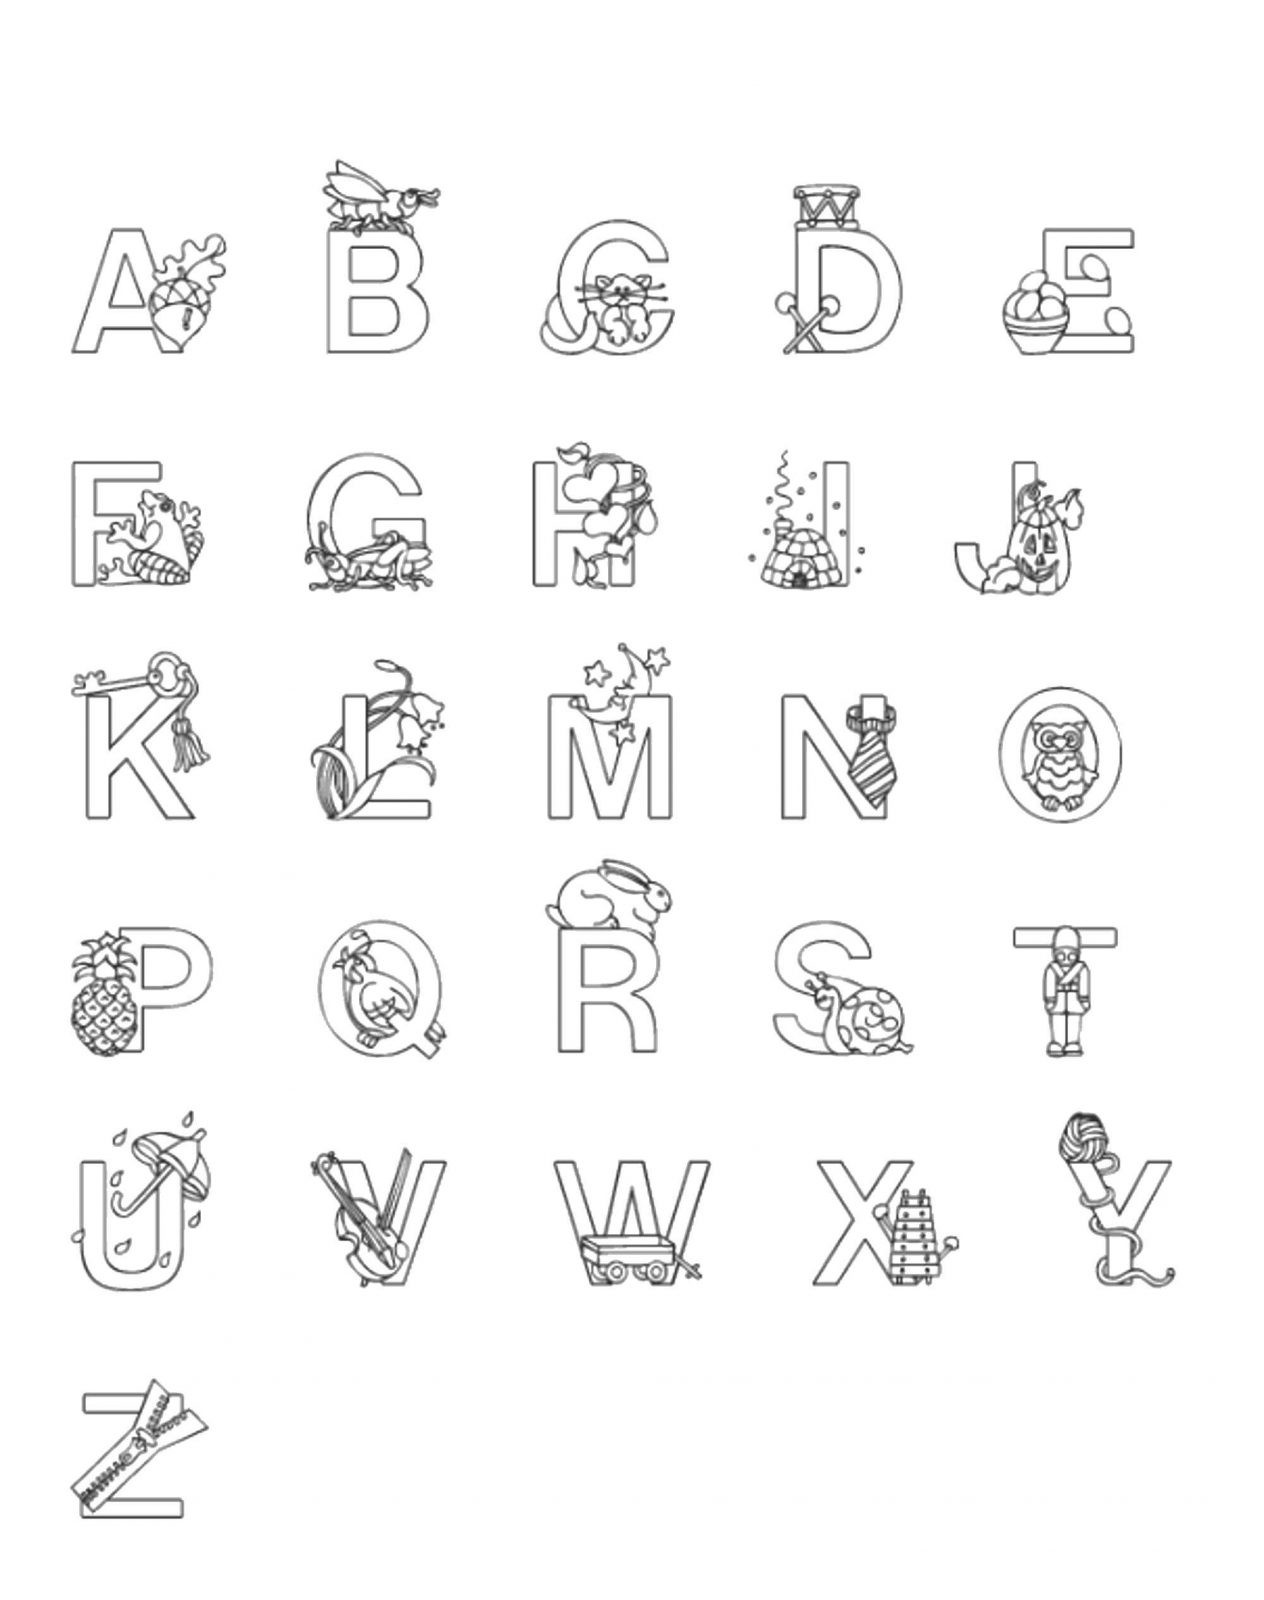 Colorful lore alphabet coloring page for kids to develop their understanding